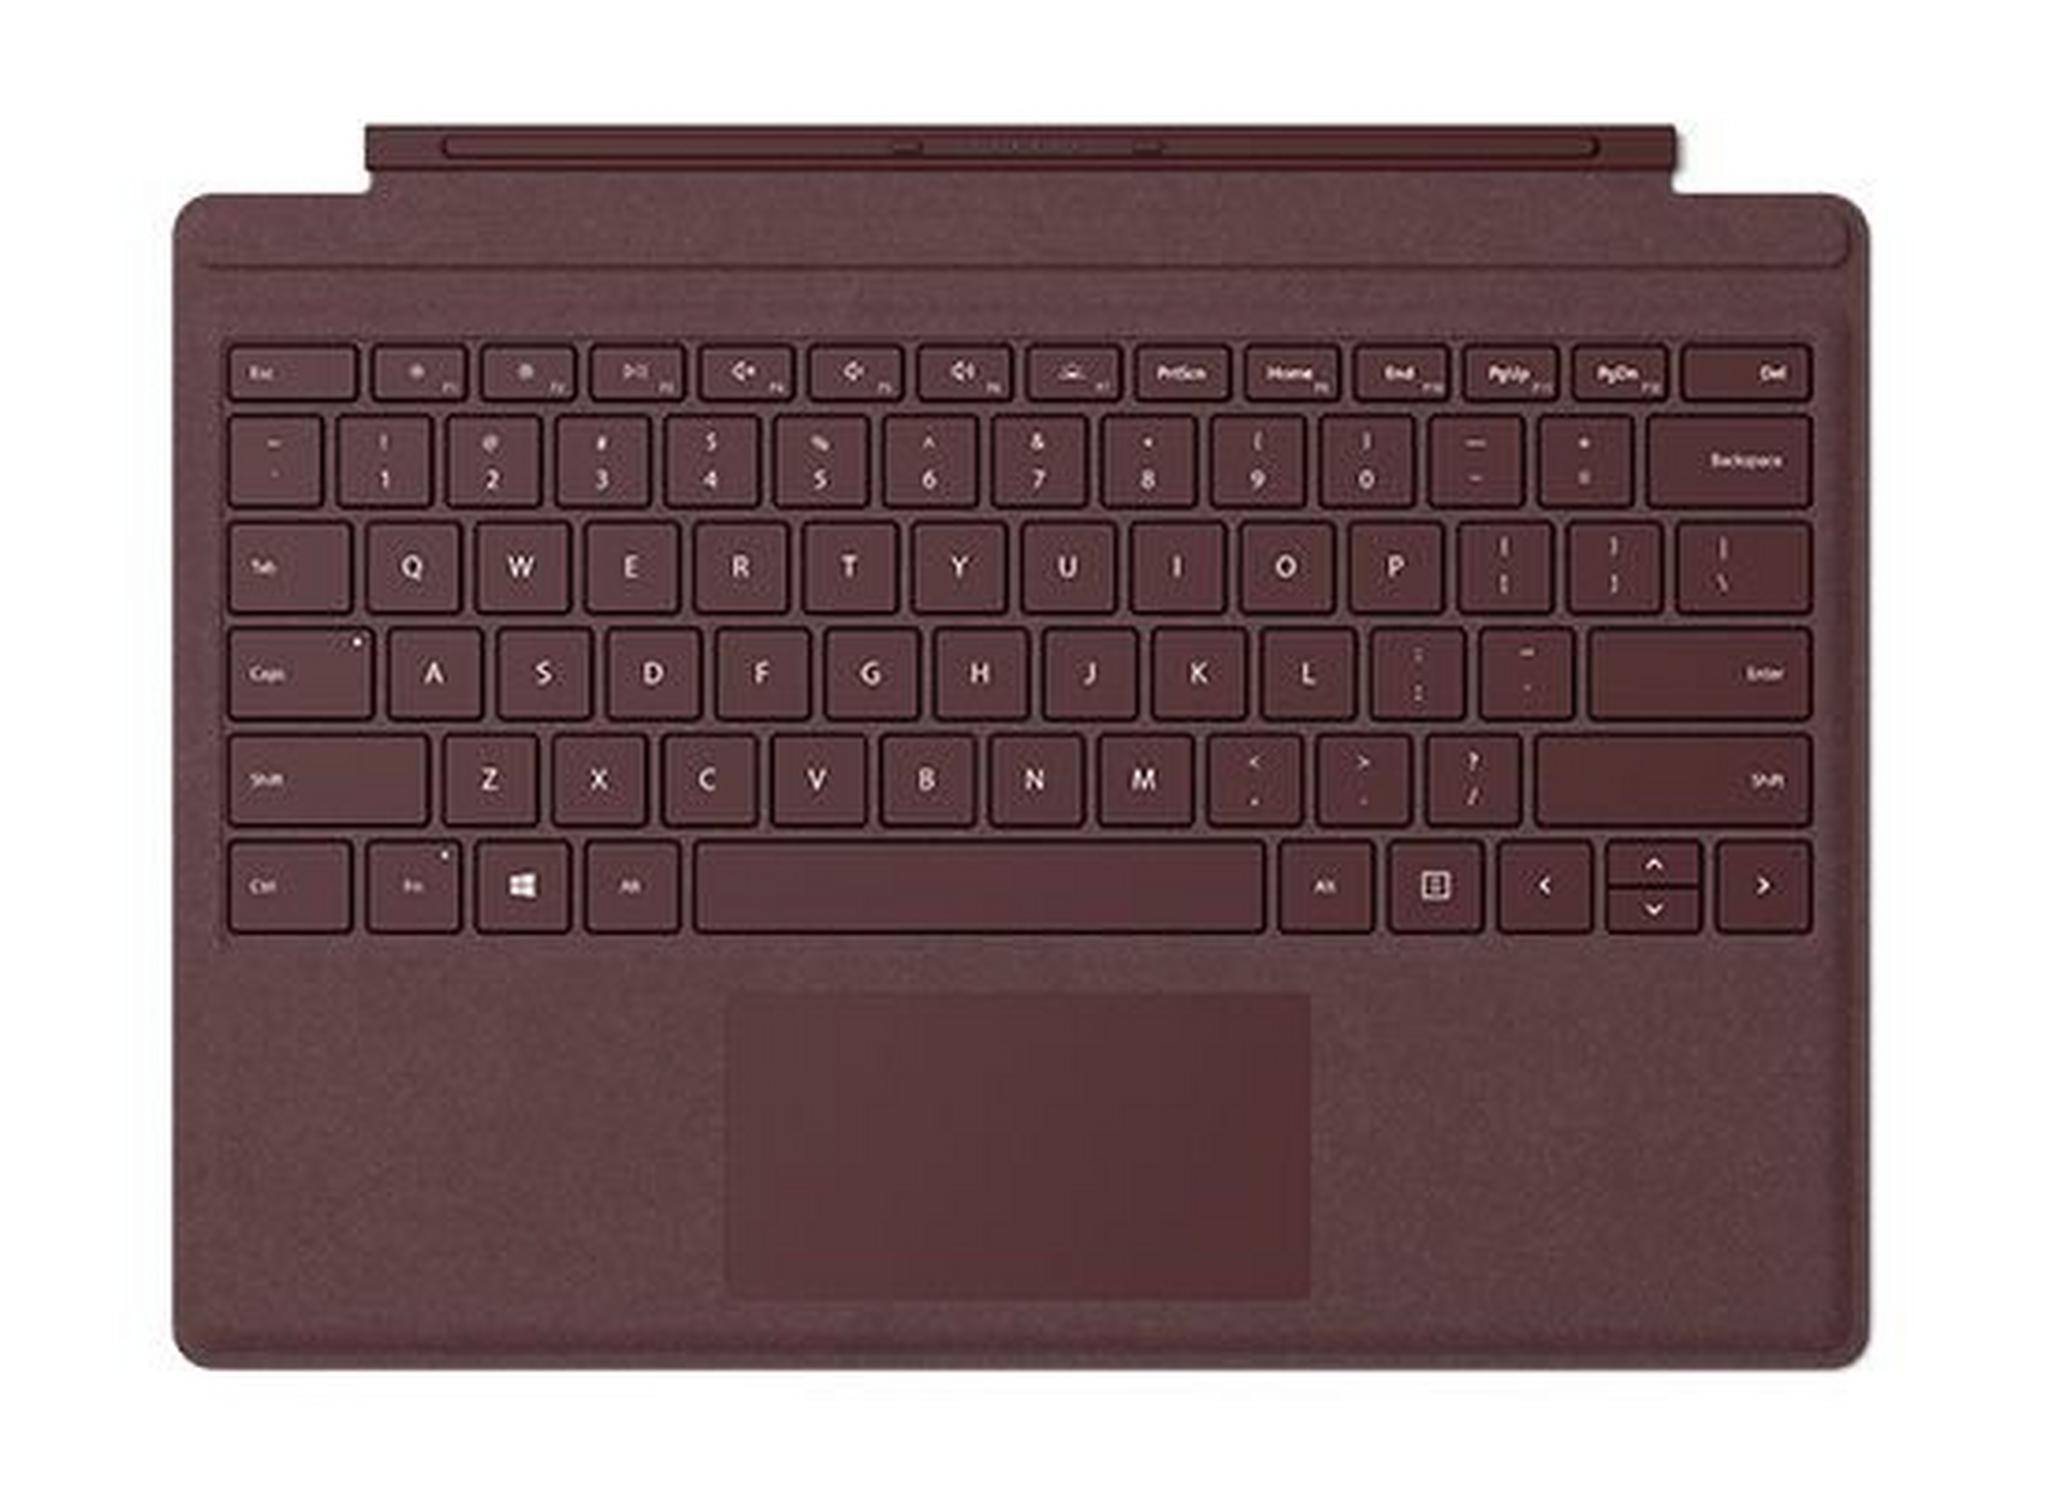 Microsoft Surface Pro 4 Type Cover – Burgundy